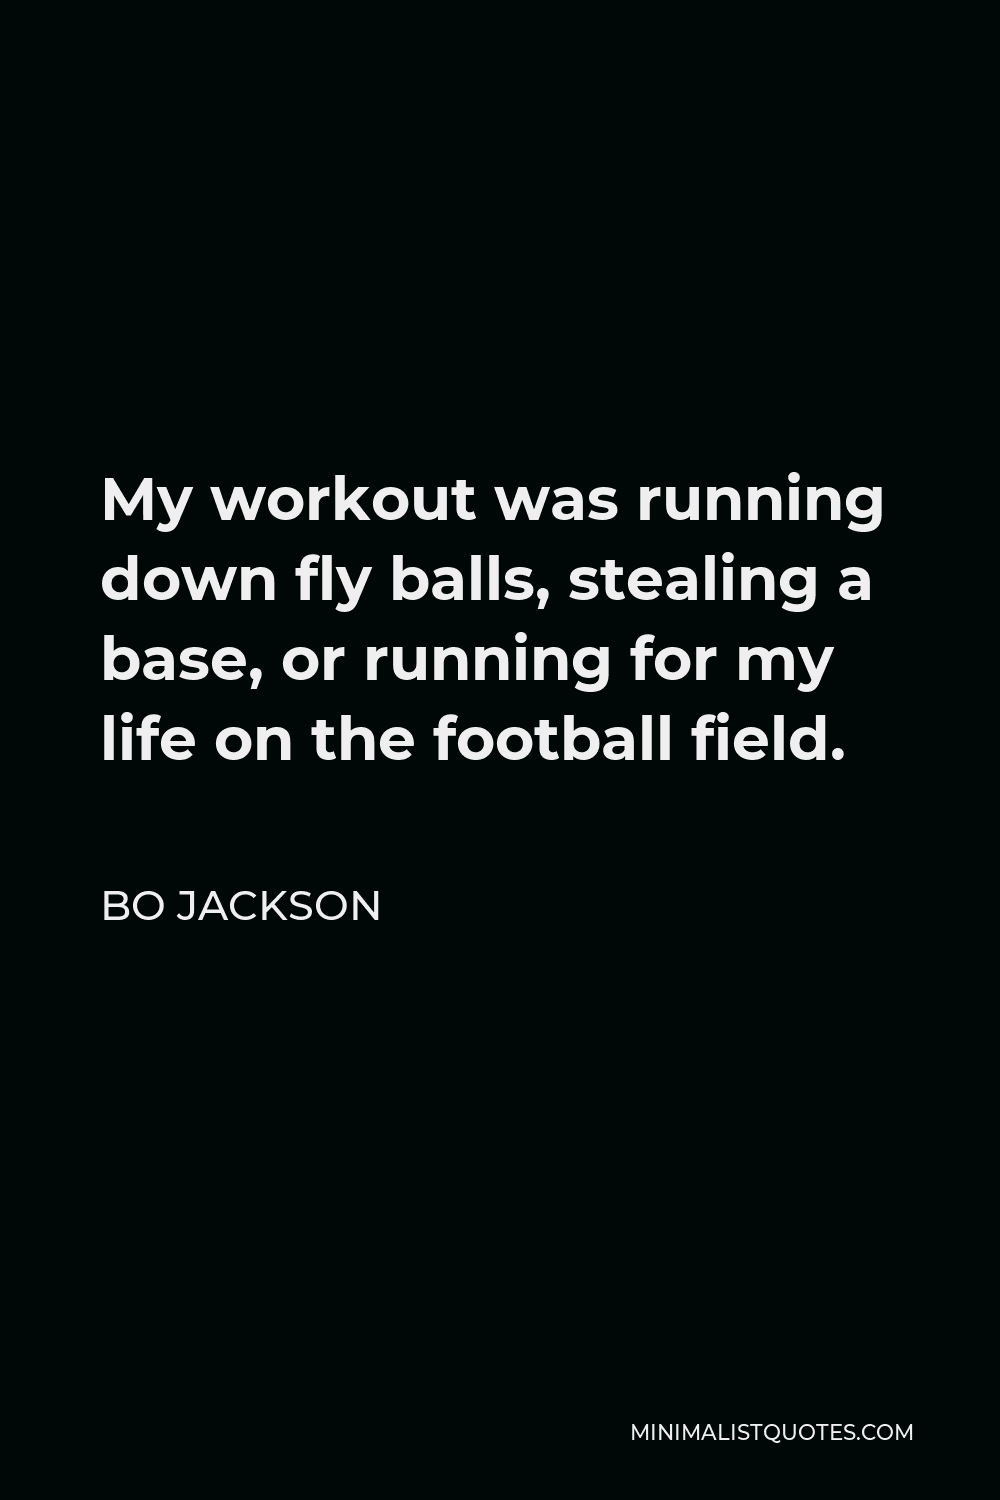 Bo Jackson Quote - My workout was running down fly balls, stealing a base, or running for my life on the football field.